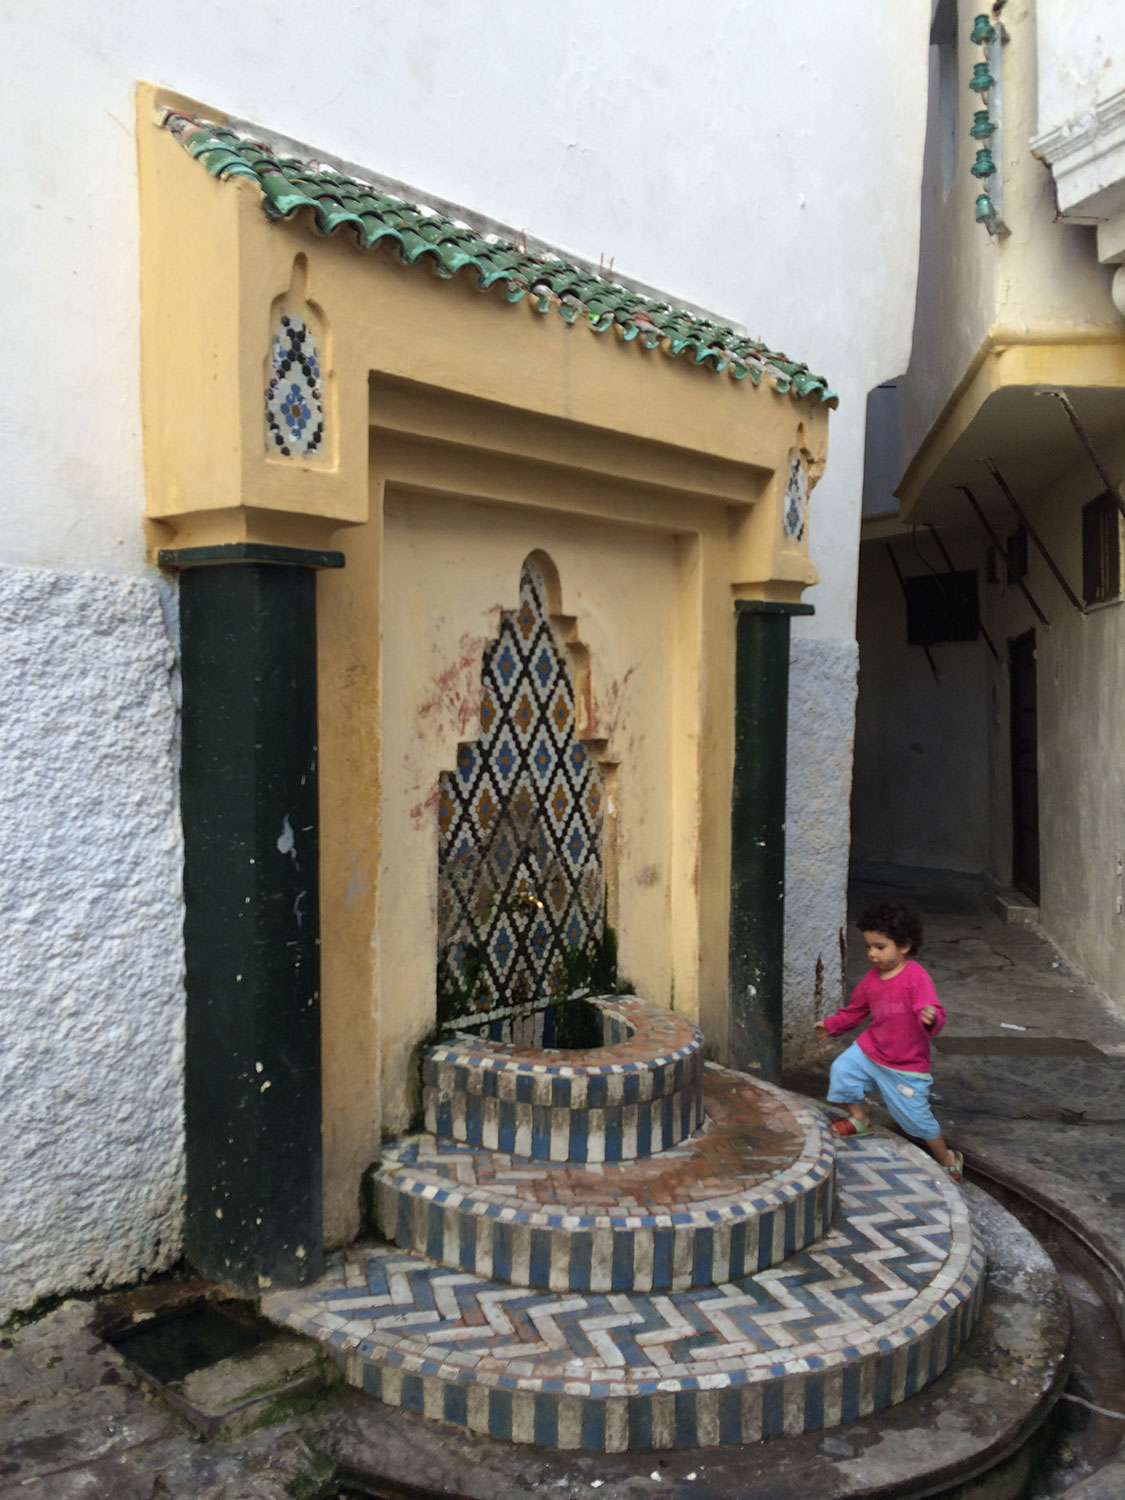 View of a child approaching the decorated fountain to the right of the entrance.